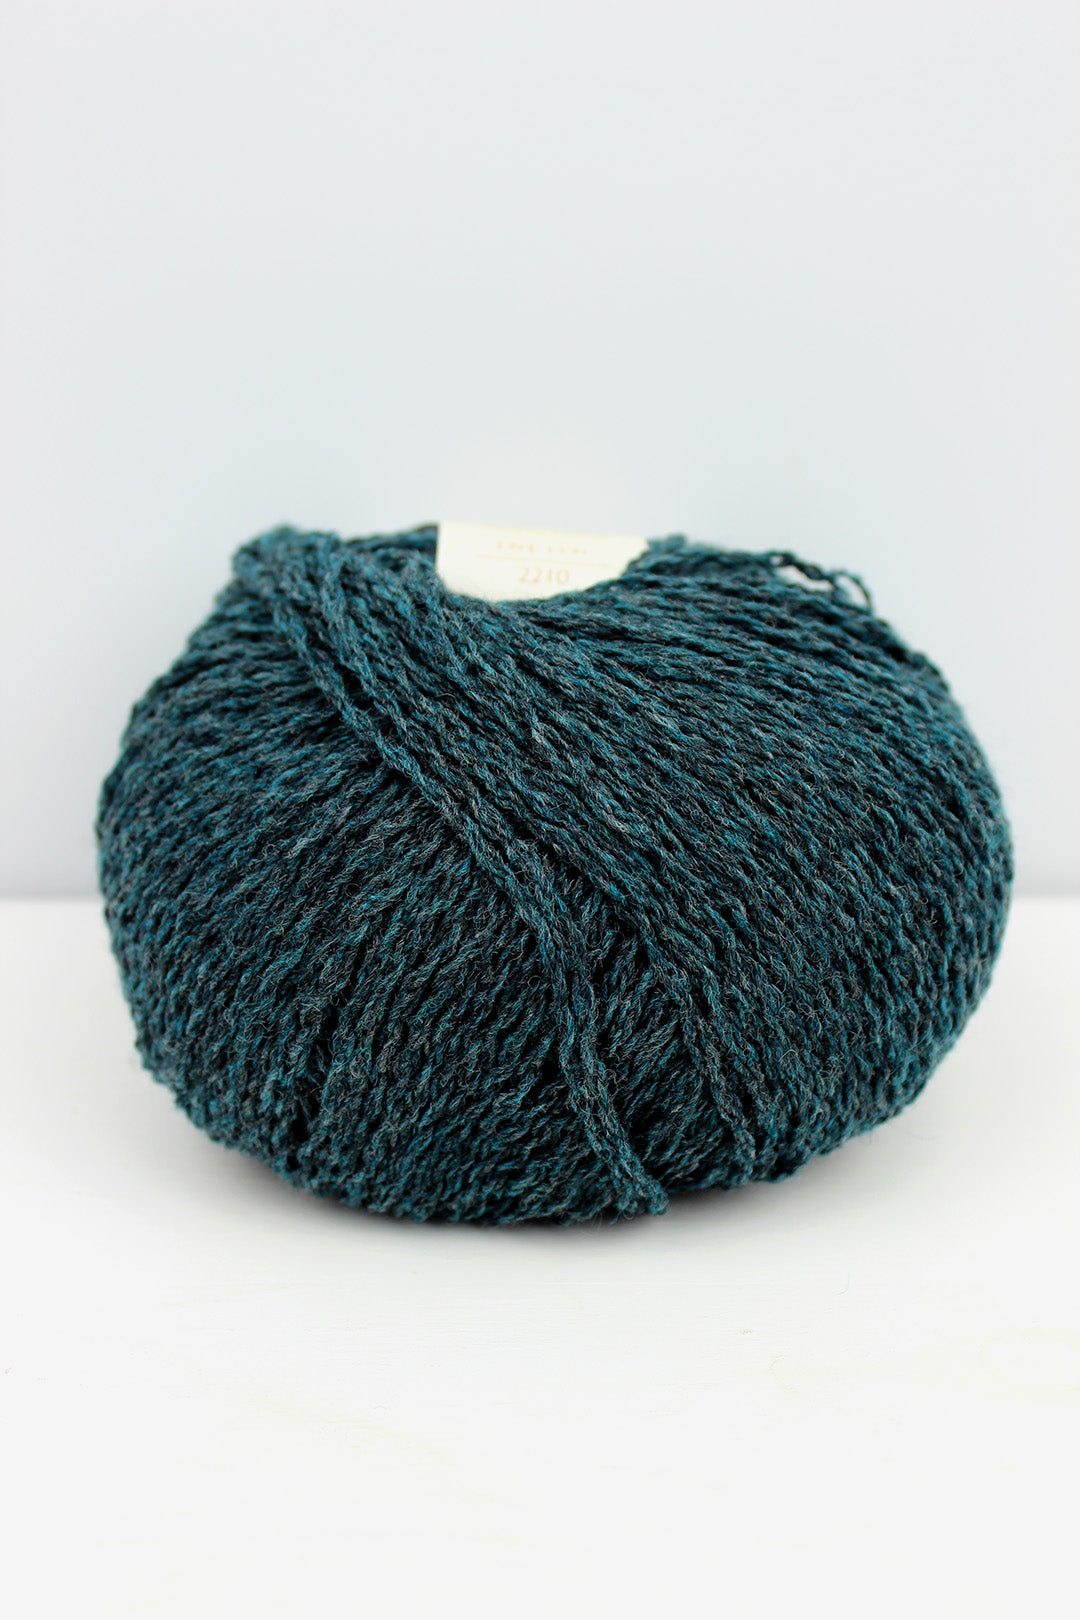 Di Gilpin yarn in a teal Storm Petrel colourway. Scottish Textiles Showcase